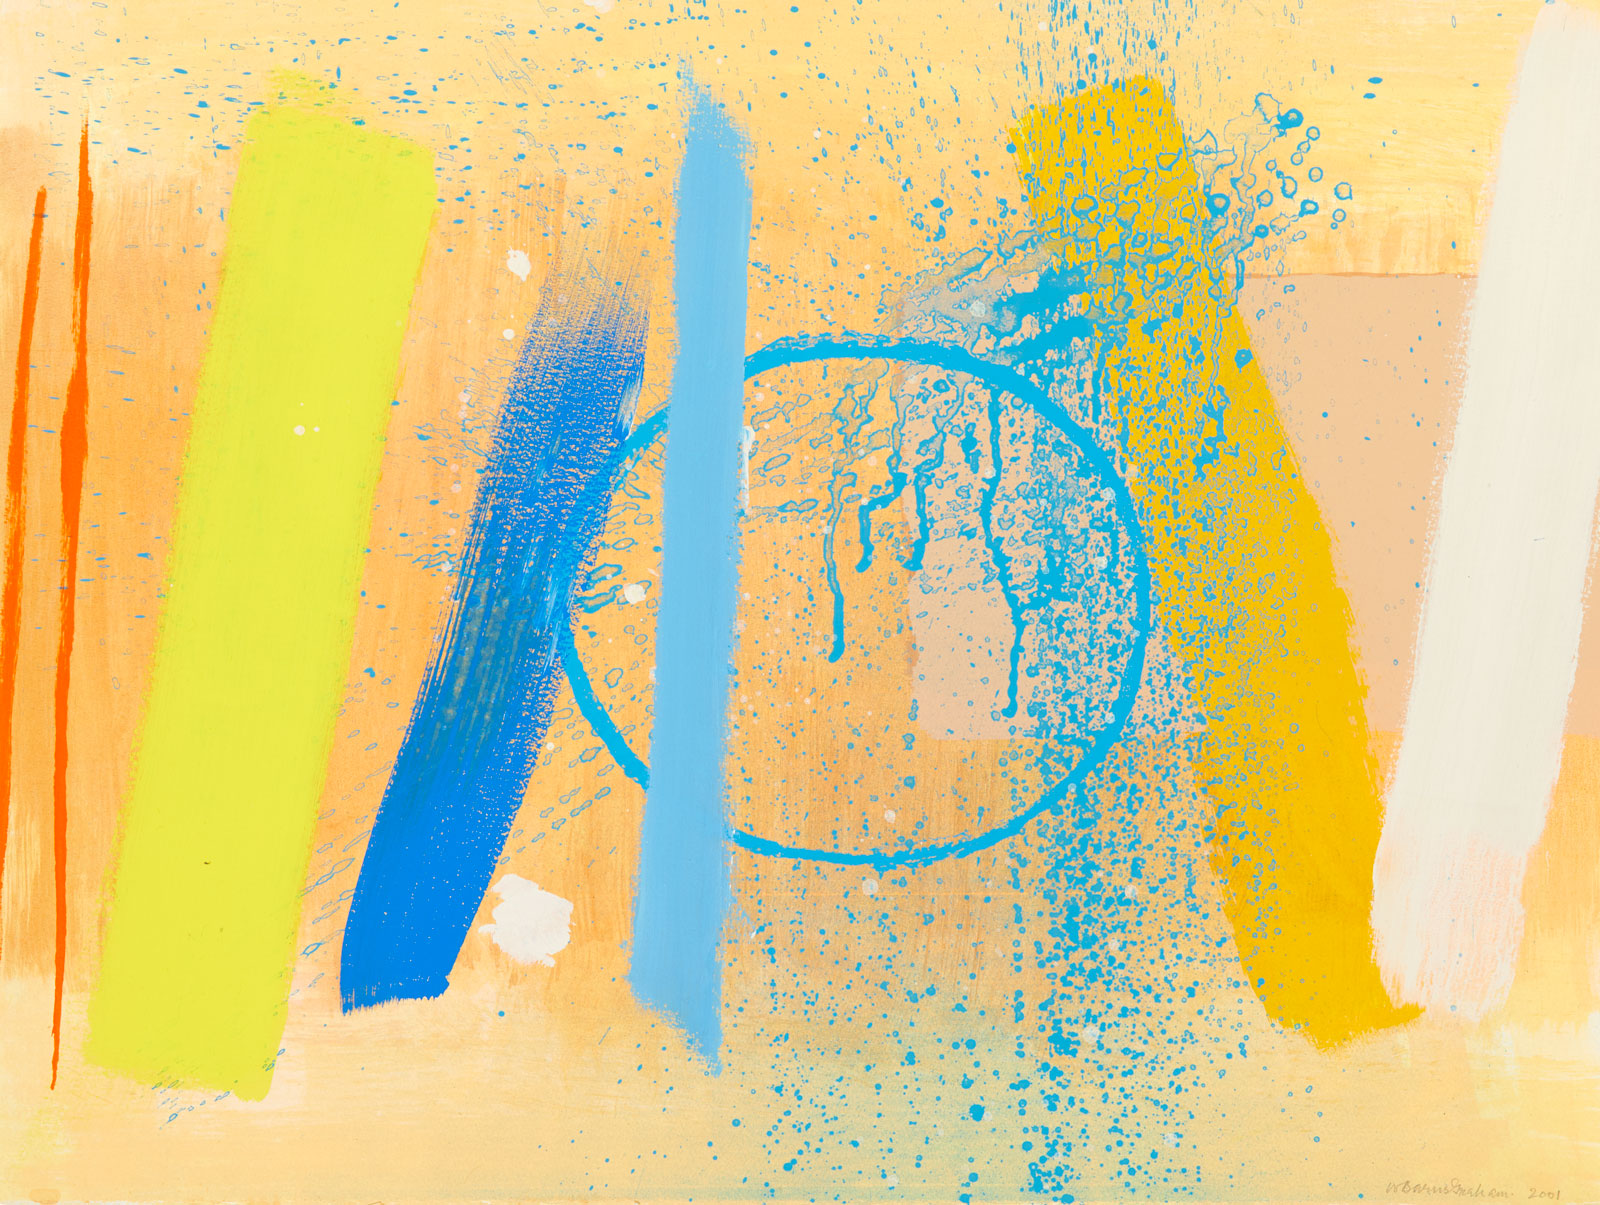 Screenprint with pale orange background and vertical brushstrokes in yellows and blues, with outline of a circle in blue at the centre